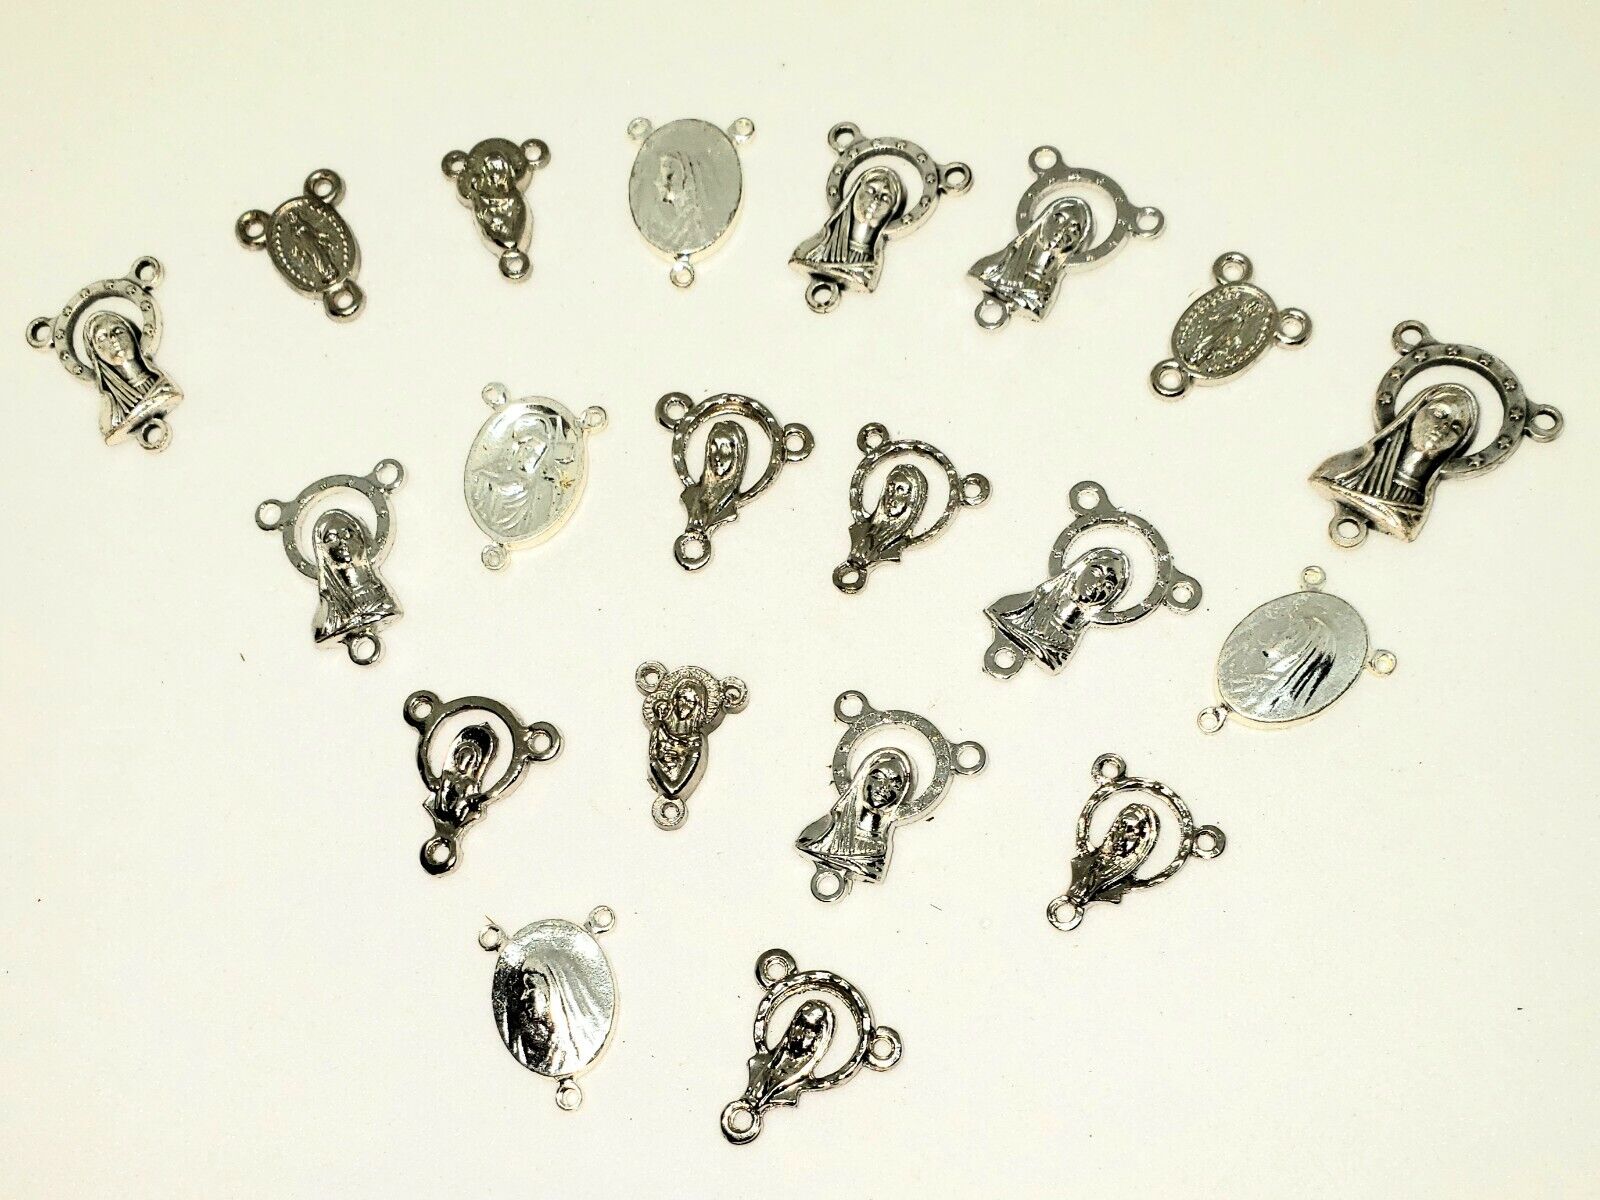 Small Rosary Centerpieces Mixed Lot of 20 Pewter SP Medallions from Chapel Italy Без бренда - фотография #4